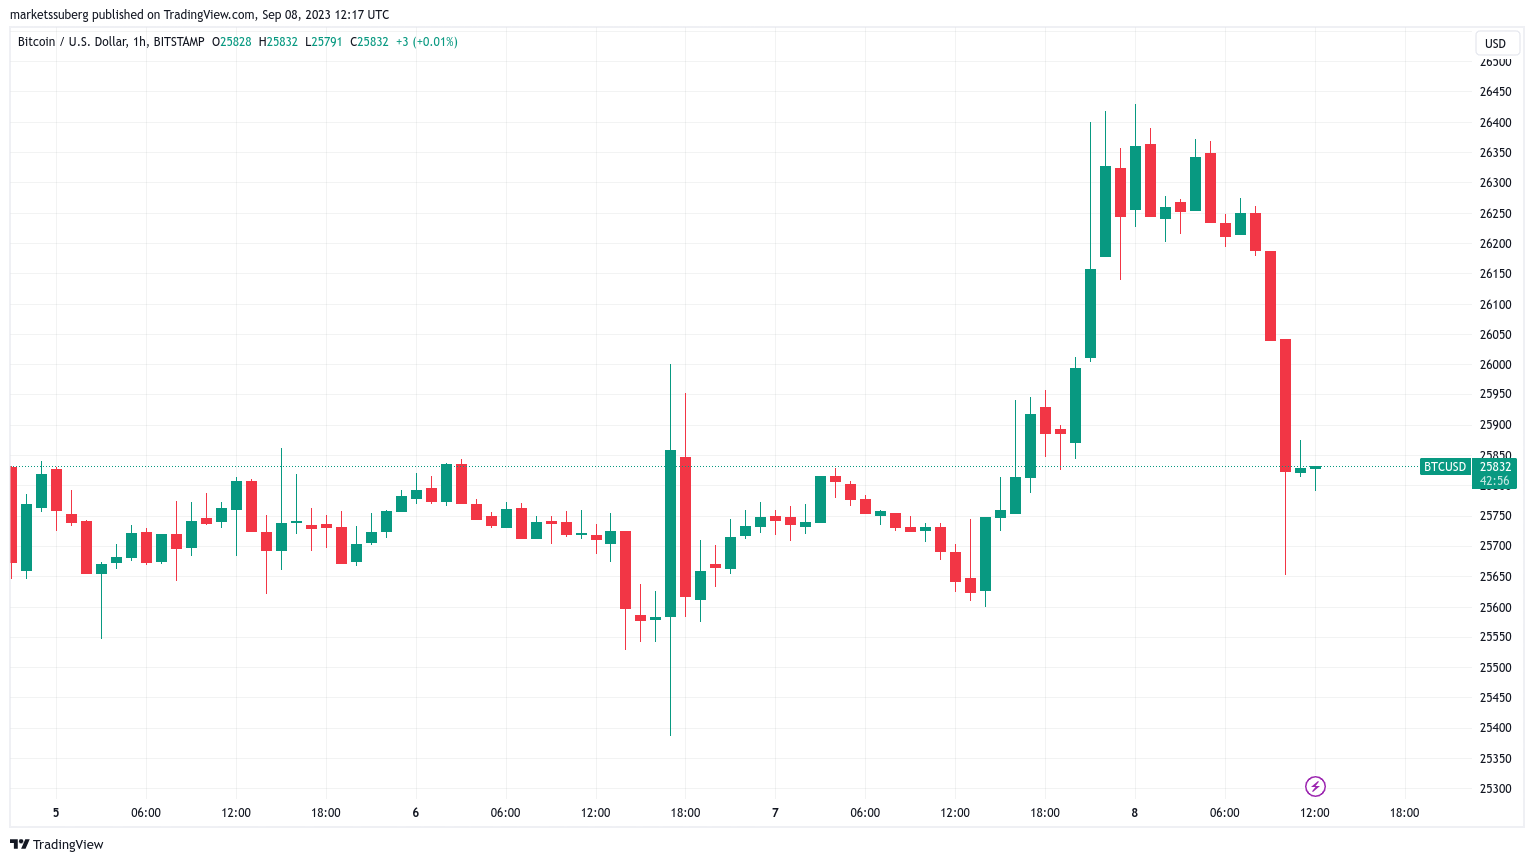 BTC/USD 1-hour chart as provided by TradingView